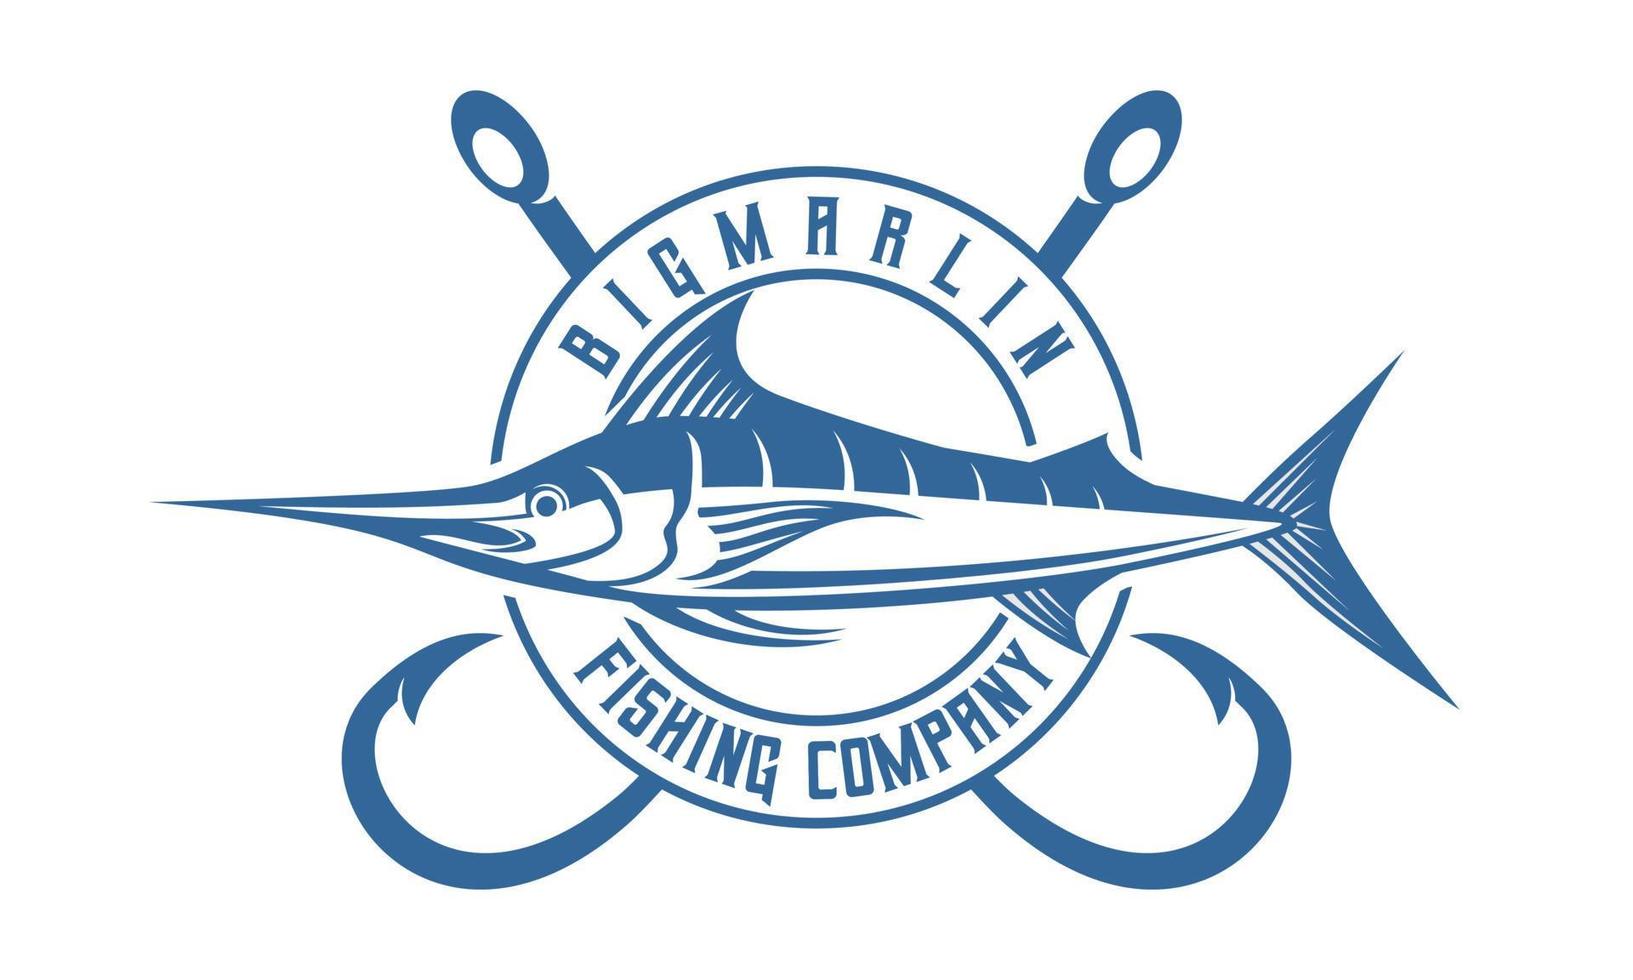 https://static.vecteezy.com/system/resources/previews/014/561/154/non_2x/marlin-fish-fishing-logo-design-vintage-template-illustration-great-for-team-brand-and-other-template-design-vector.jpg